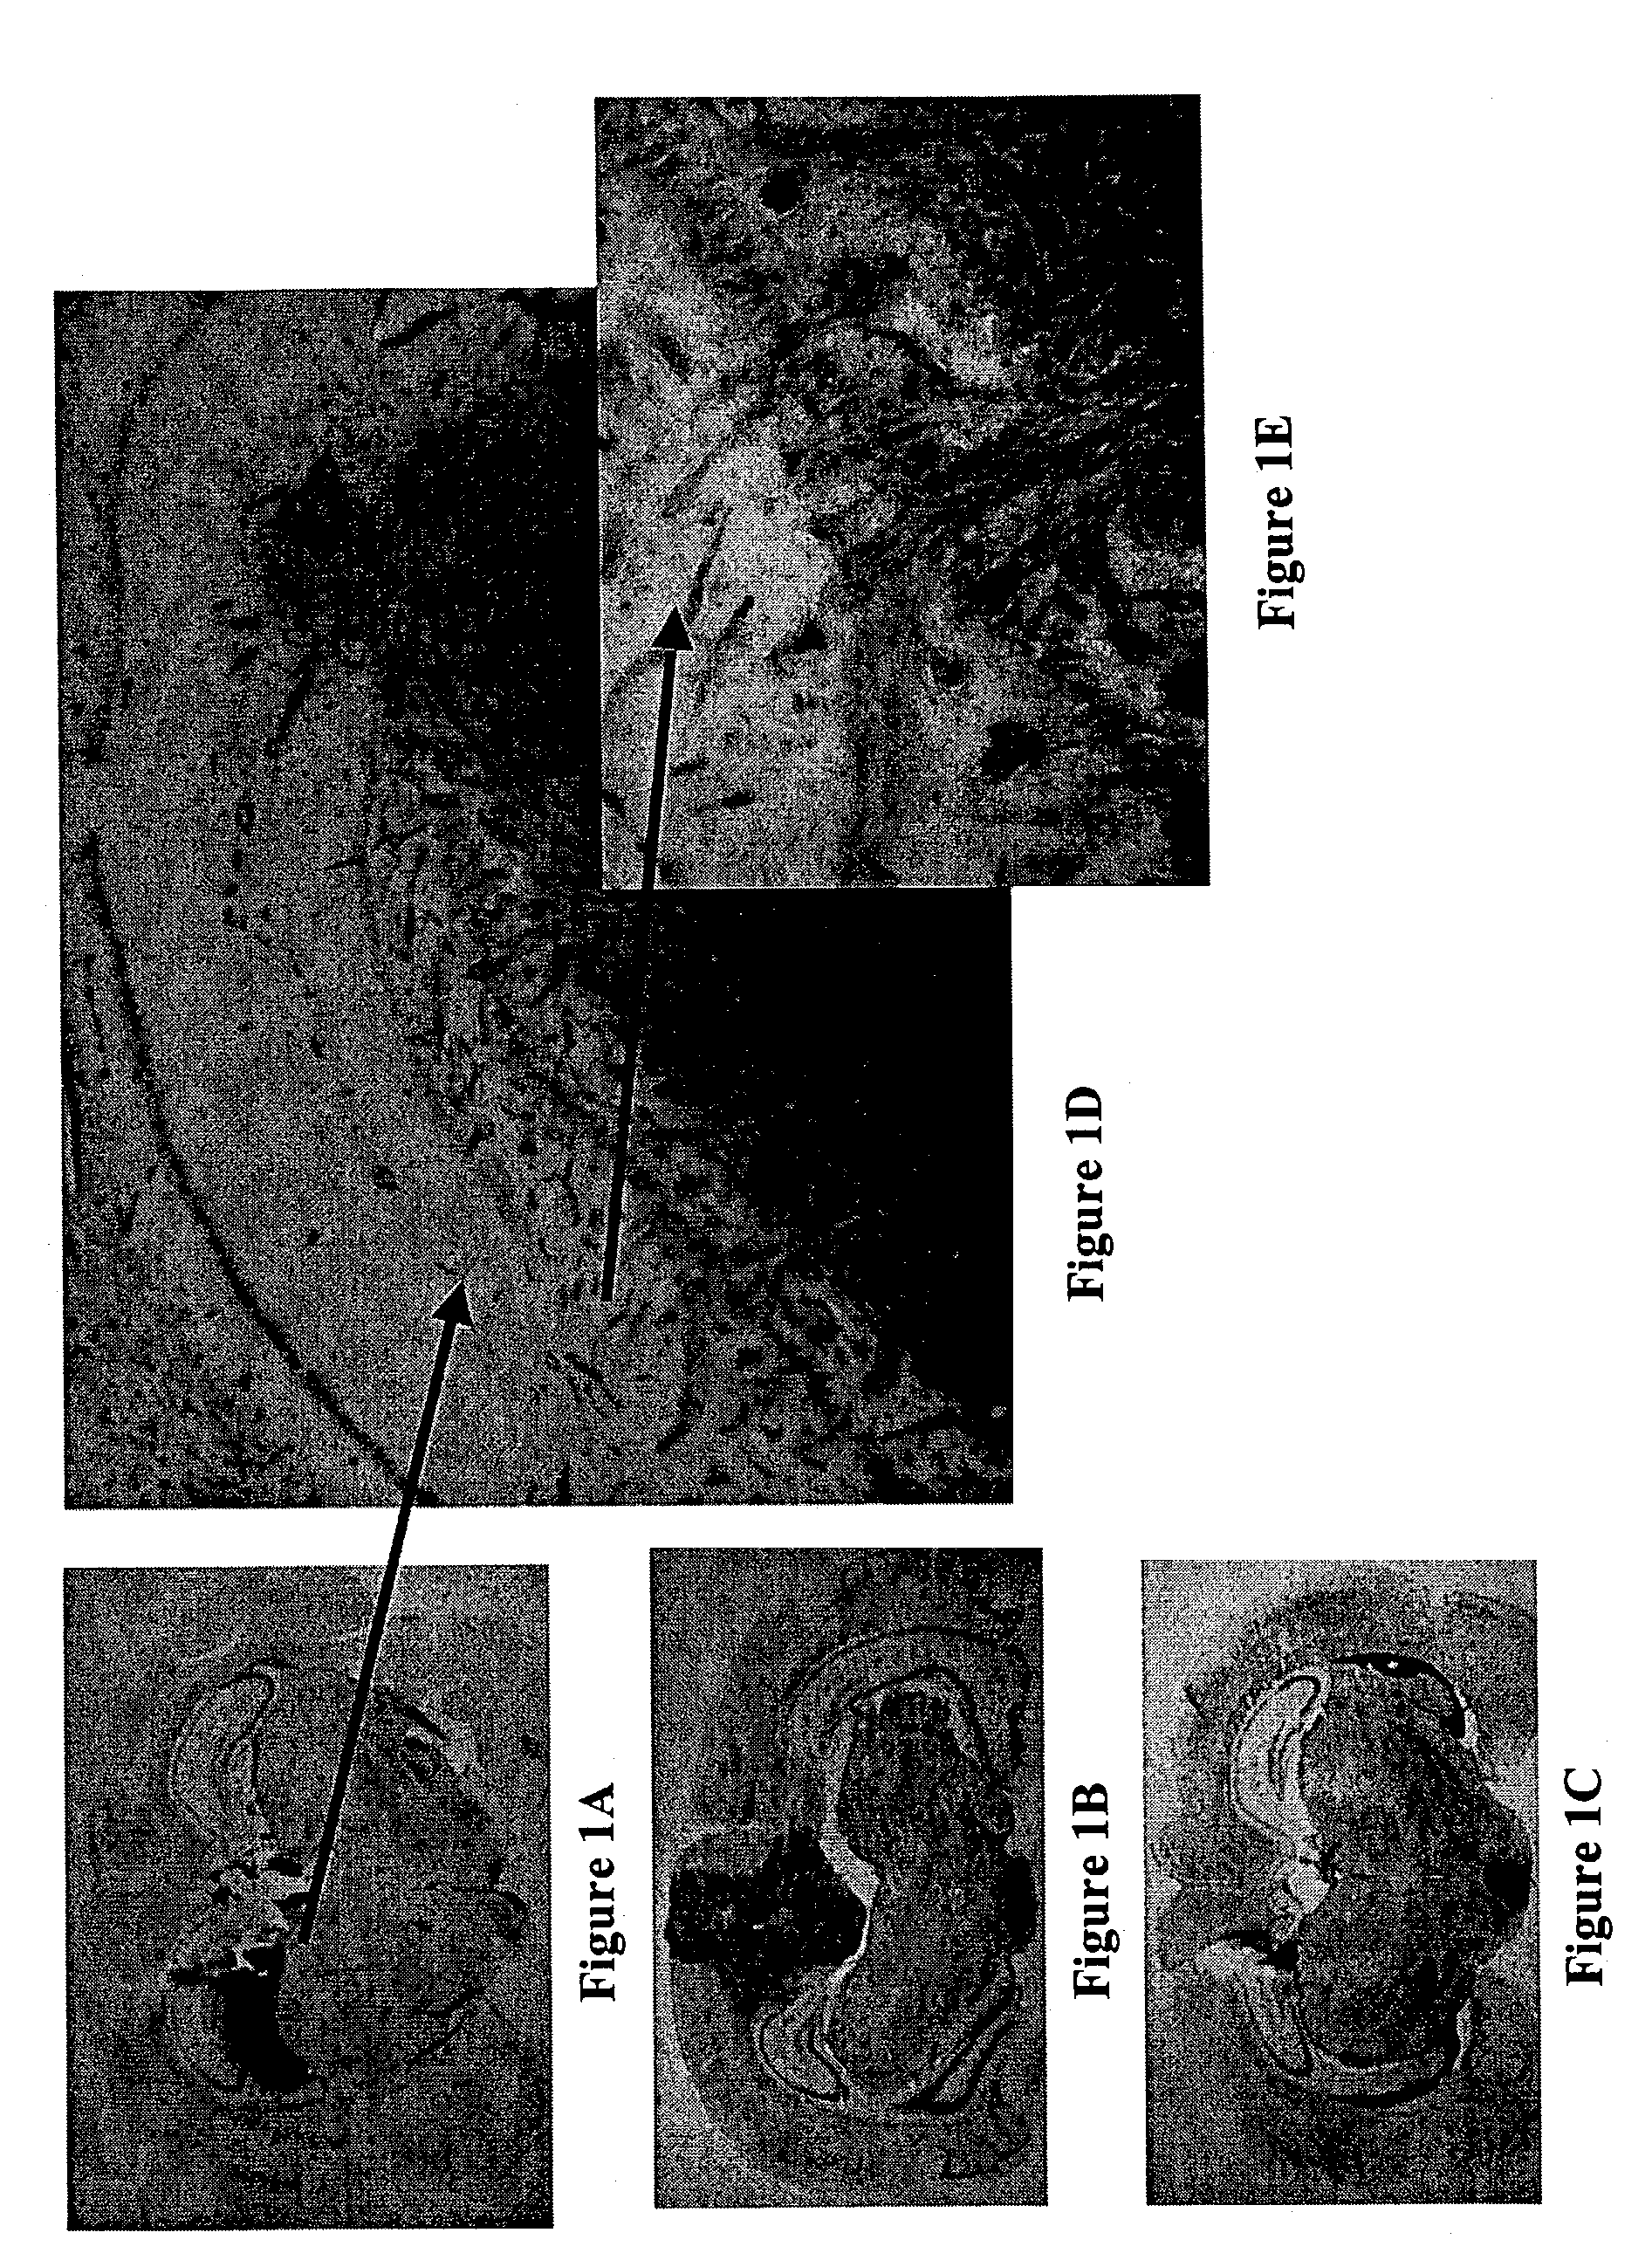 Substituted tetrahydroisoquinoline compounds, methods of making, and their use